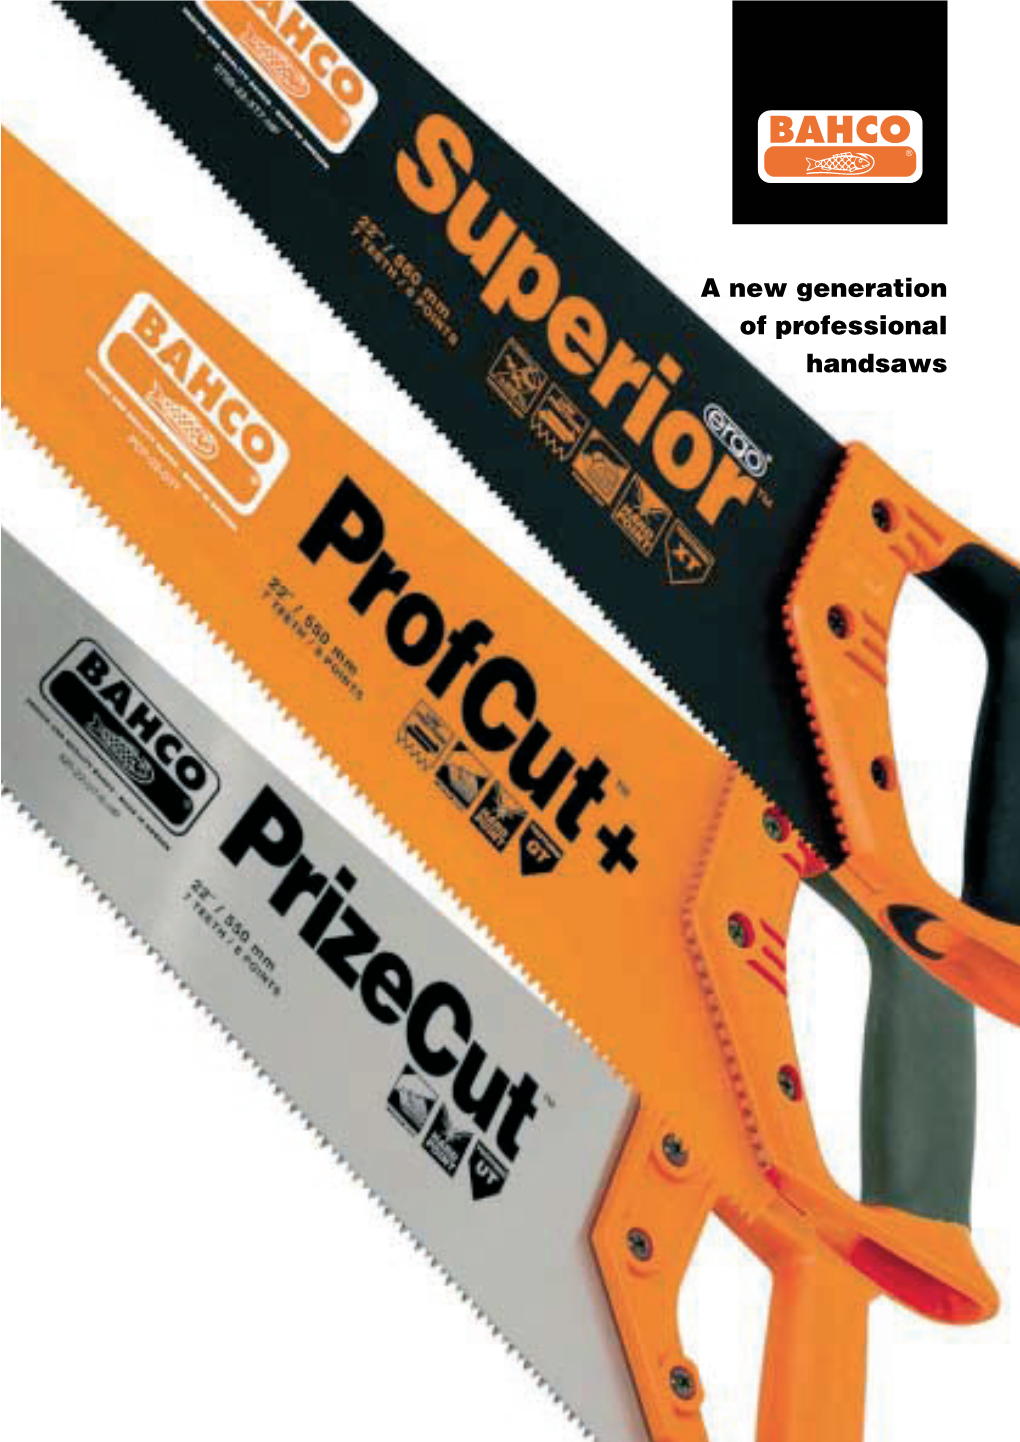 A New Generation of Professional Handsaws